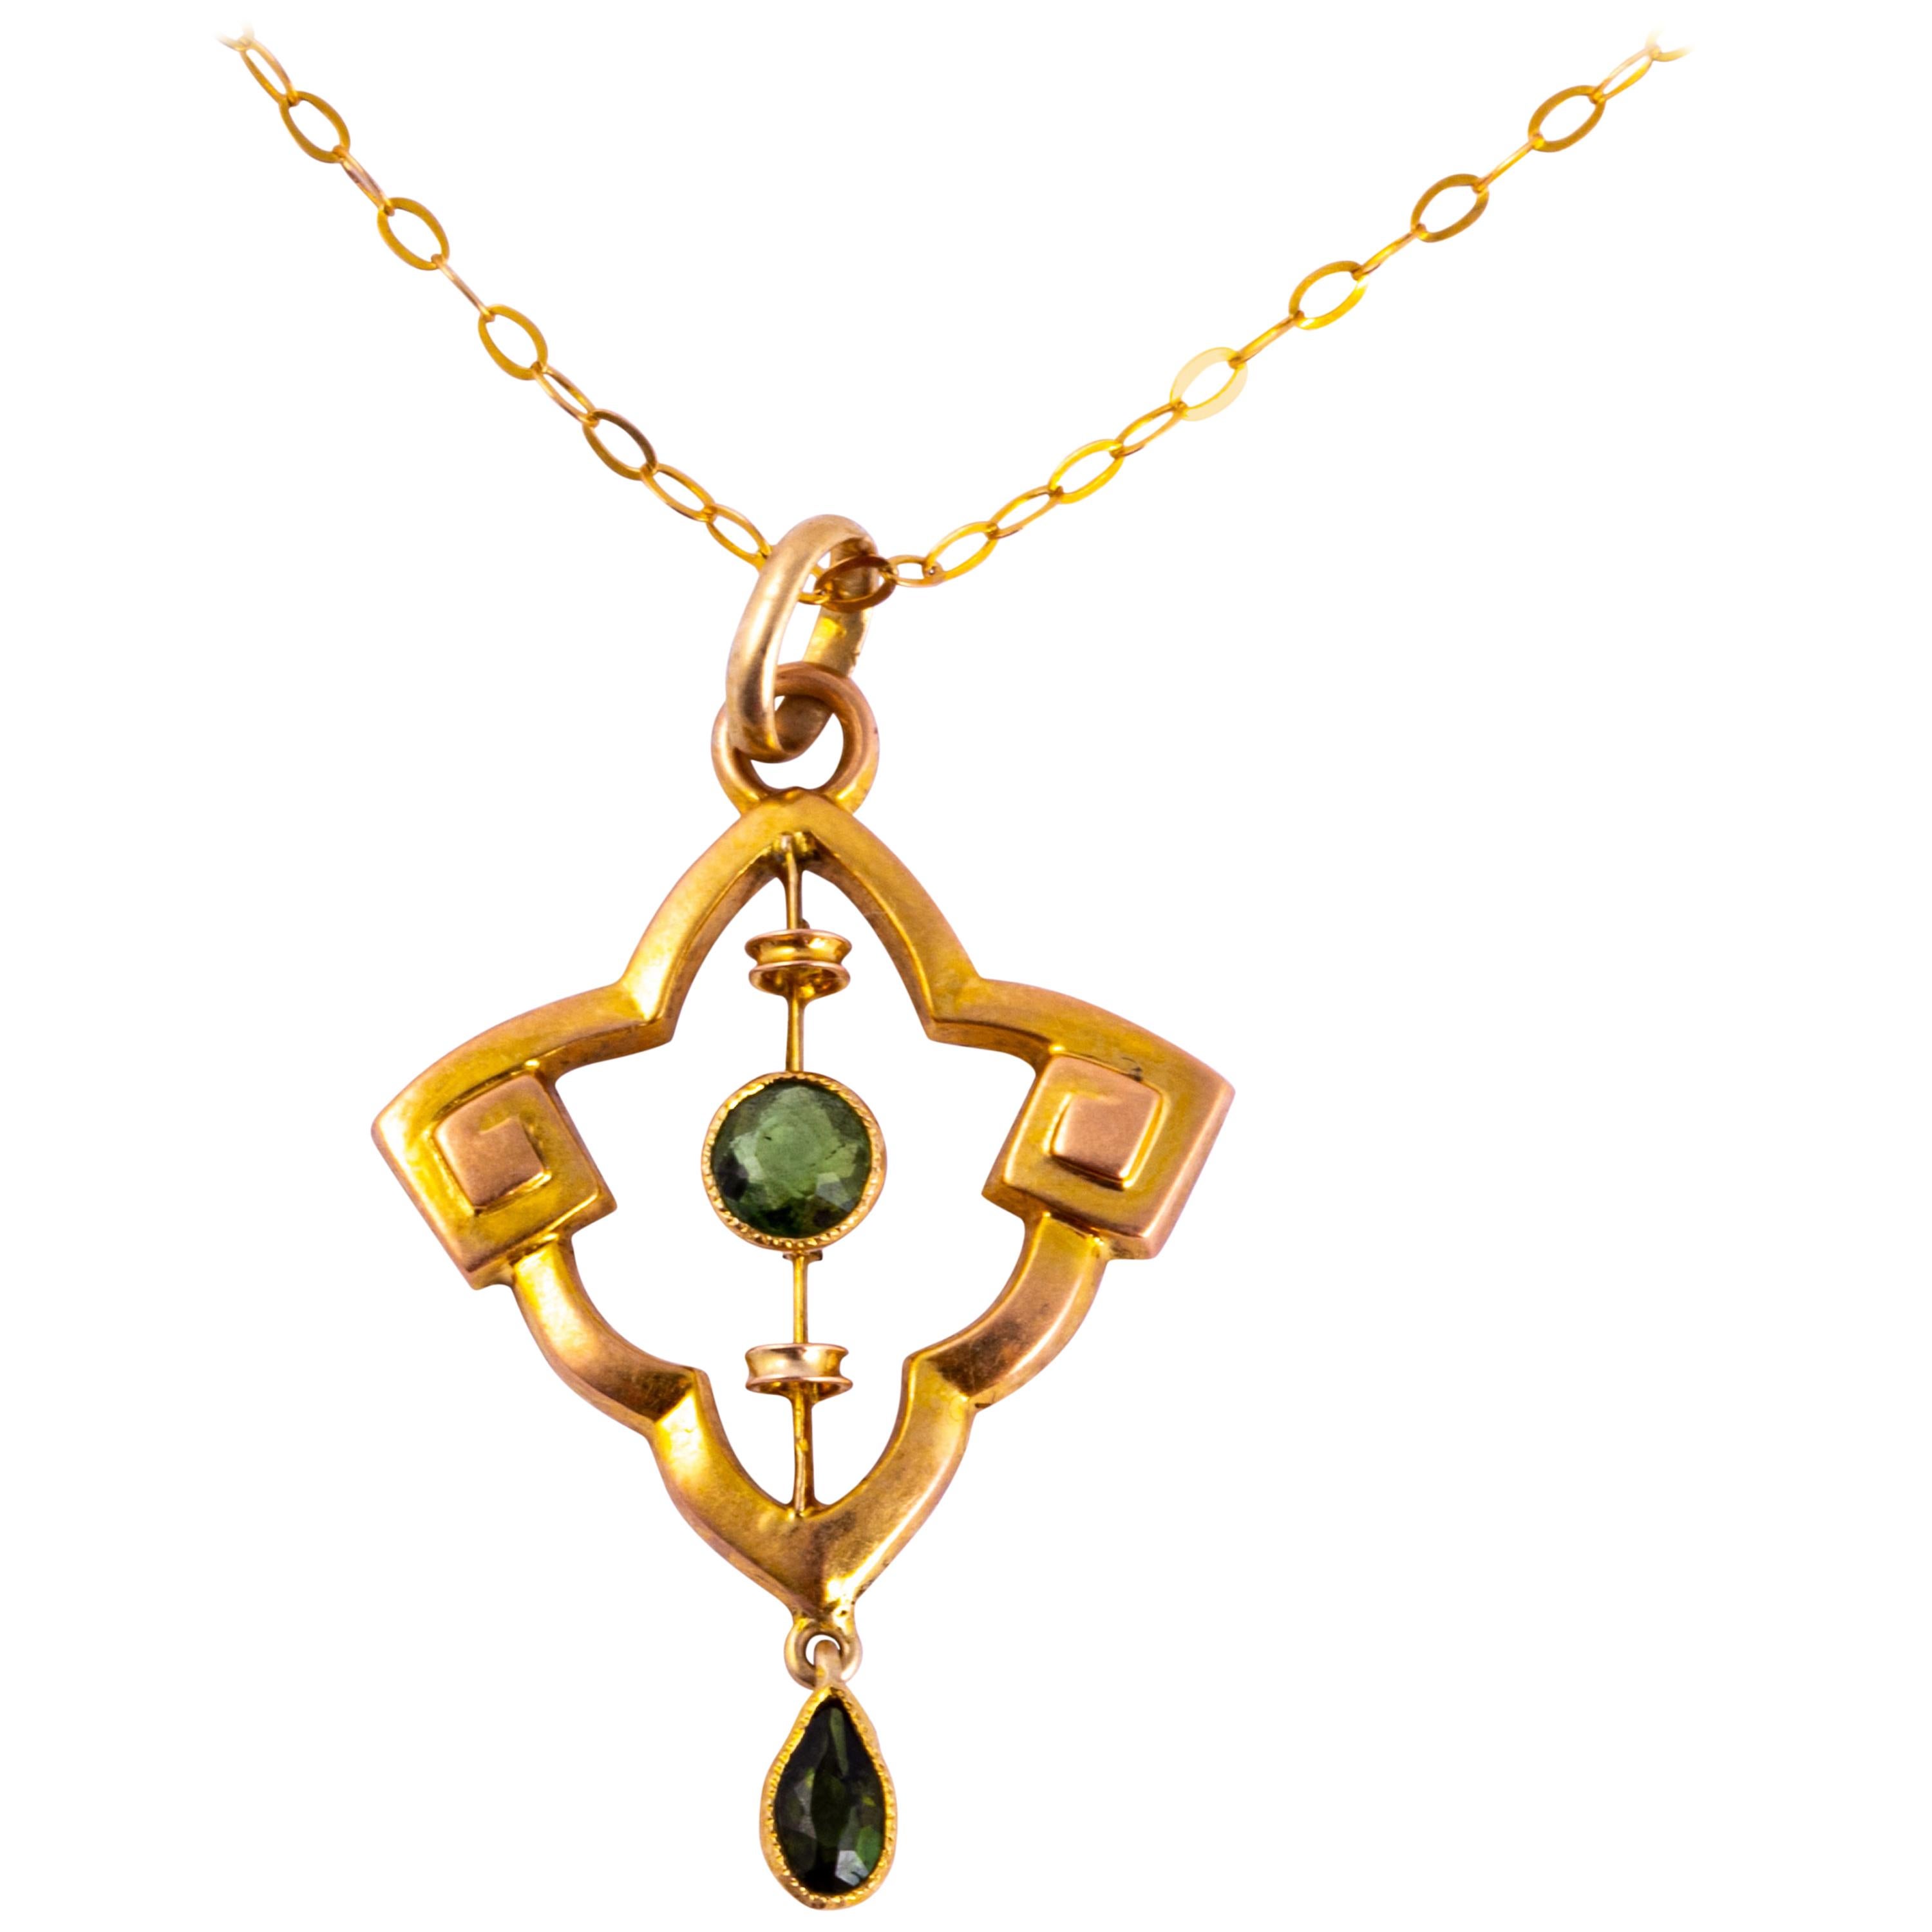 Antique Peridot and 9 Carat Gold Pendant and Chain